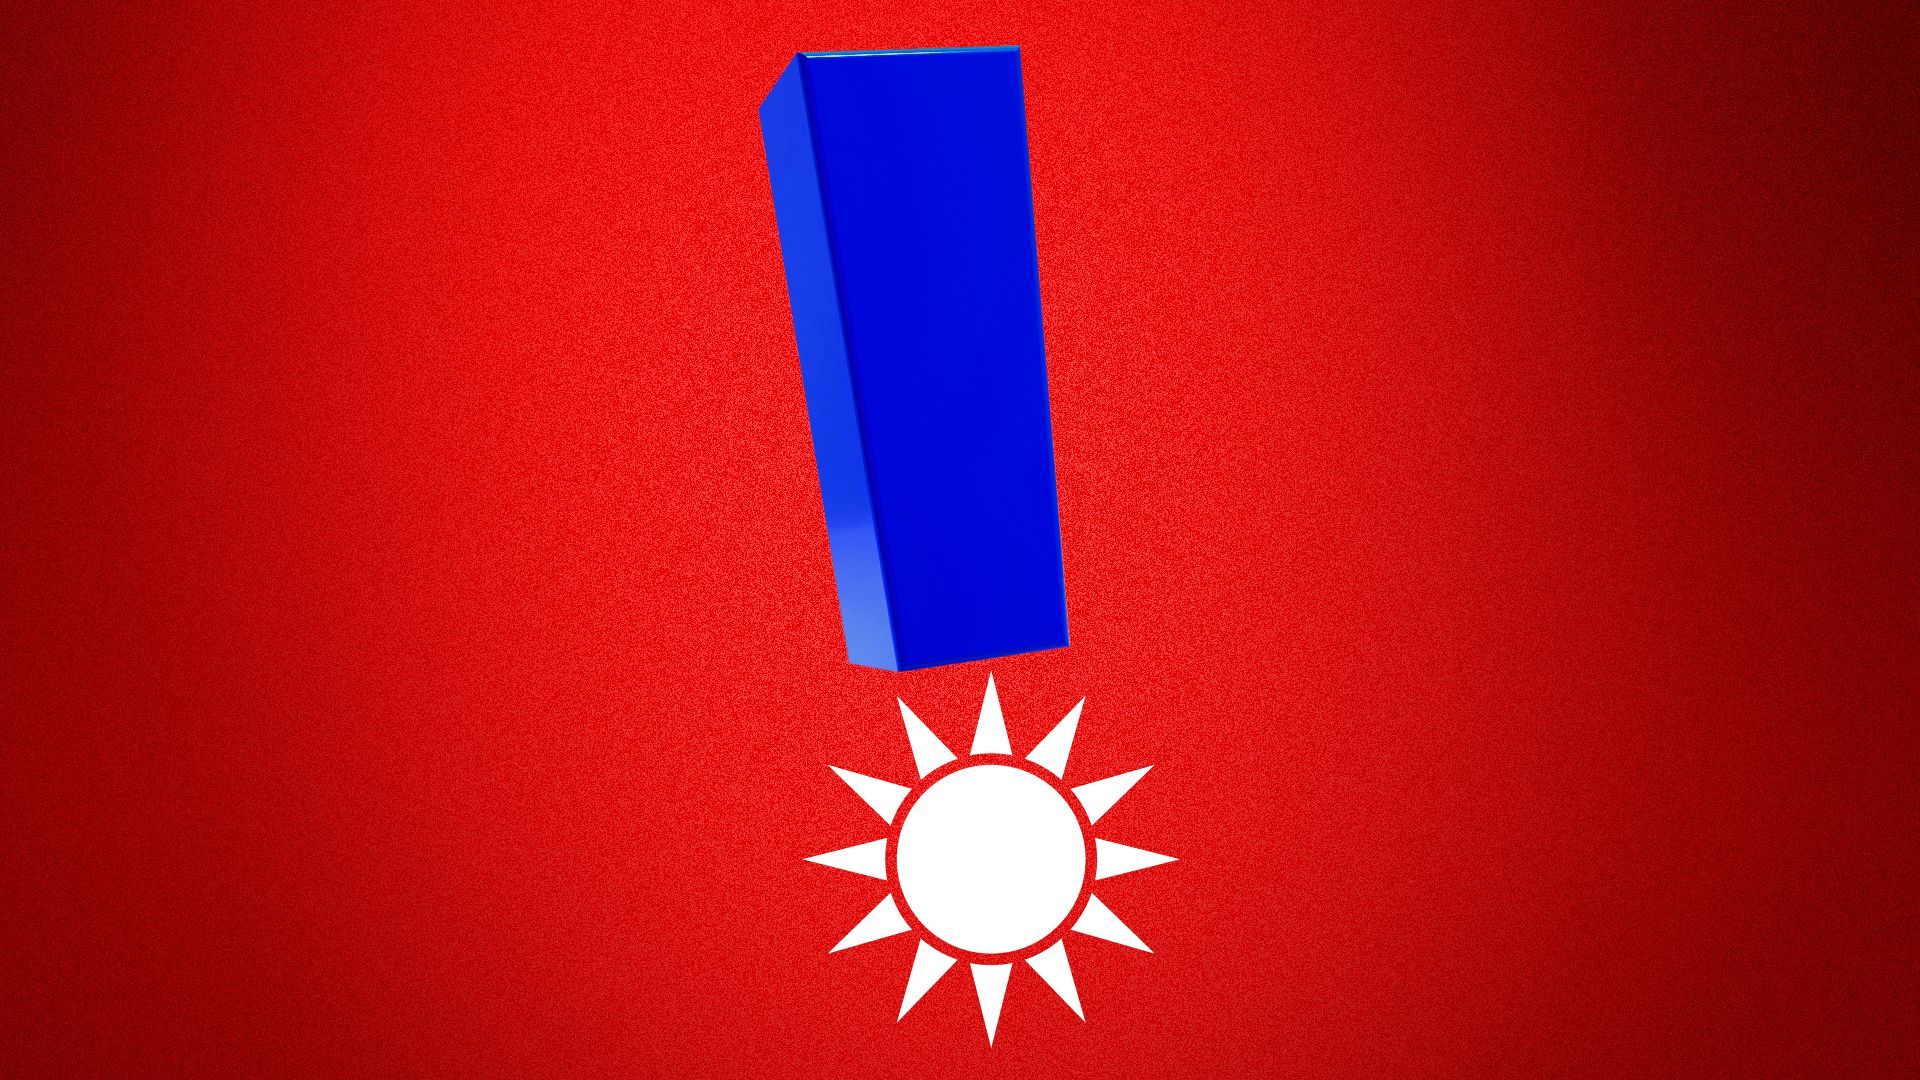 Illustration of an exclamation point stylized with the sun from the Taiwanese flag as the dot.